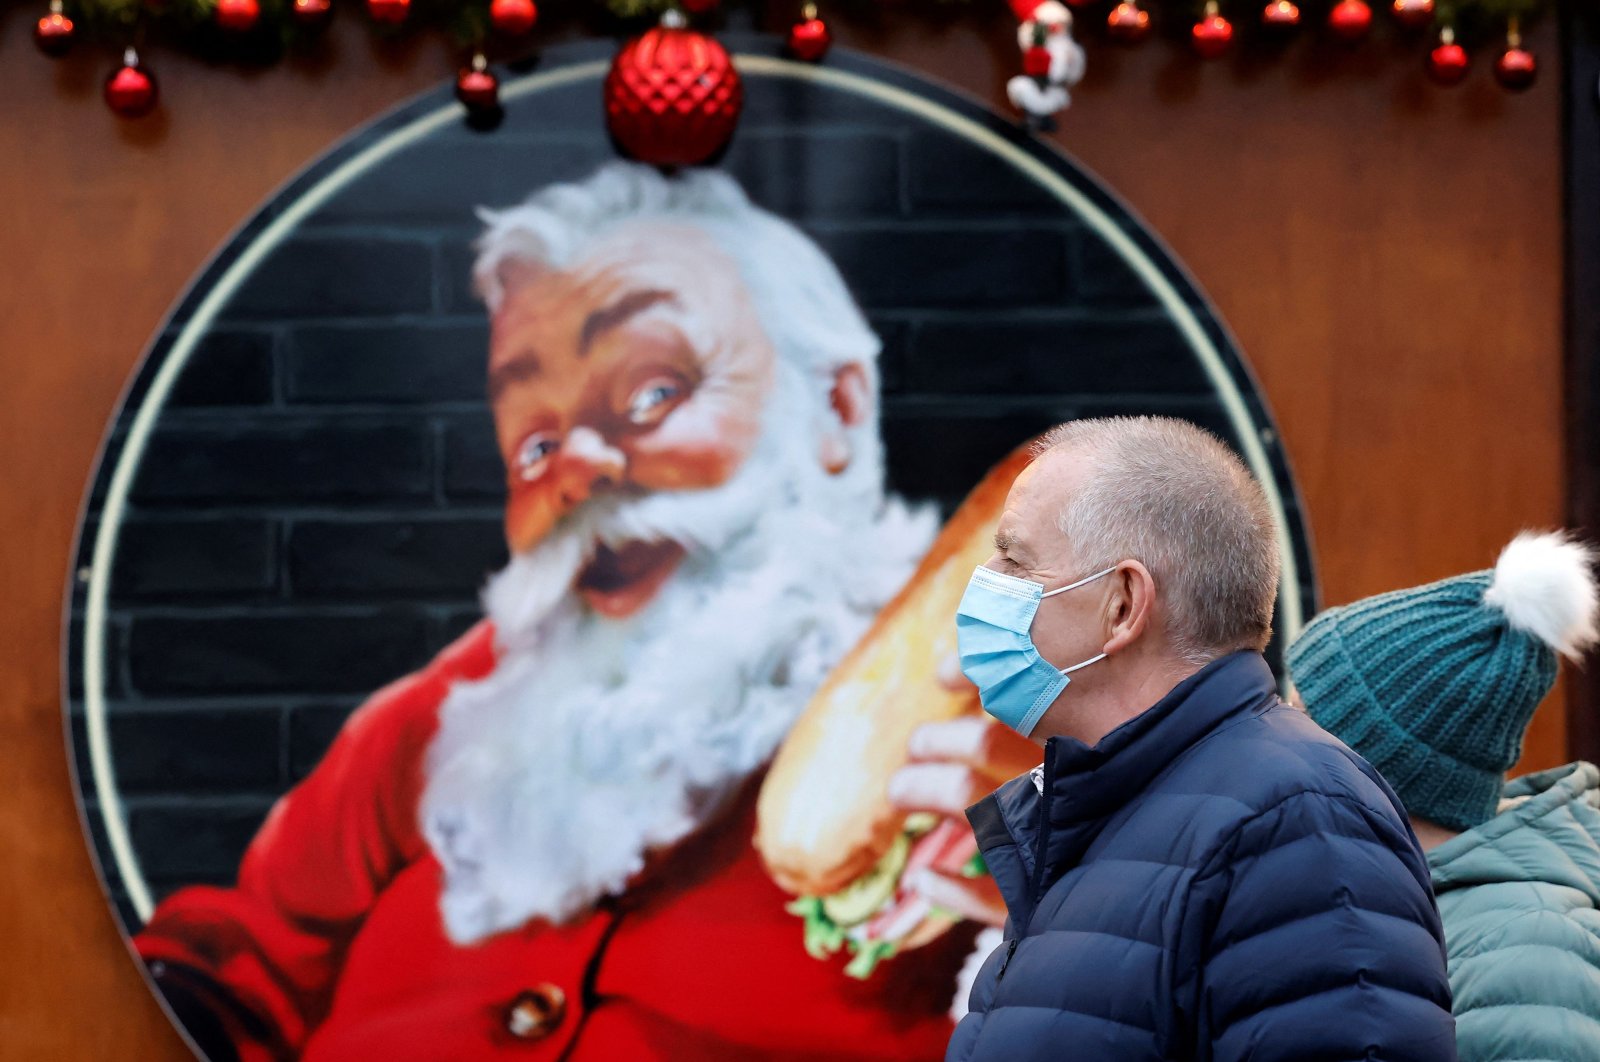 Shoppers, some wearing protective masks to combat the spread of Covid-19, walk past stalls at a Christmas market in central London, Britain, Dec. 18, 2021. (AFP Photo)